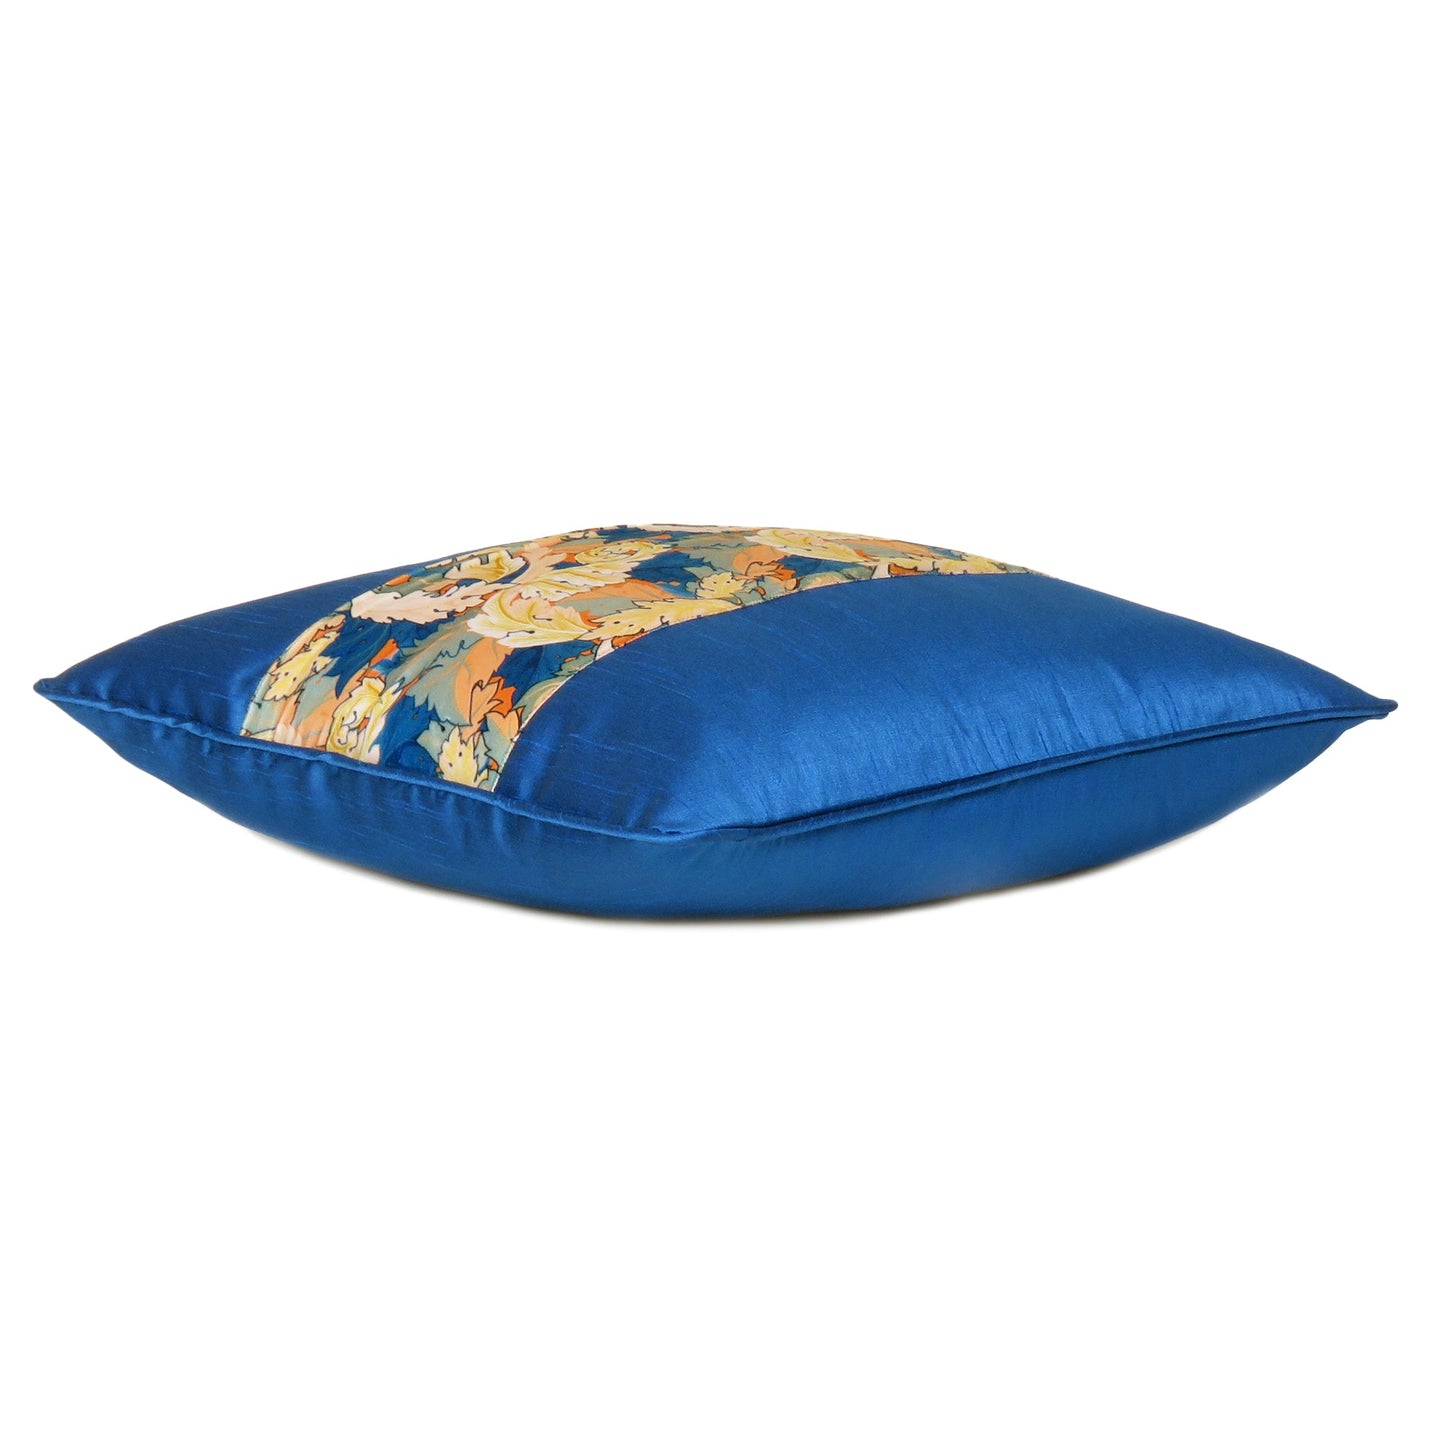 Velvet Polydupion Decorative Printed Cushion Cases in Set of 2 - Royal Blue